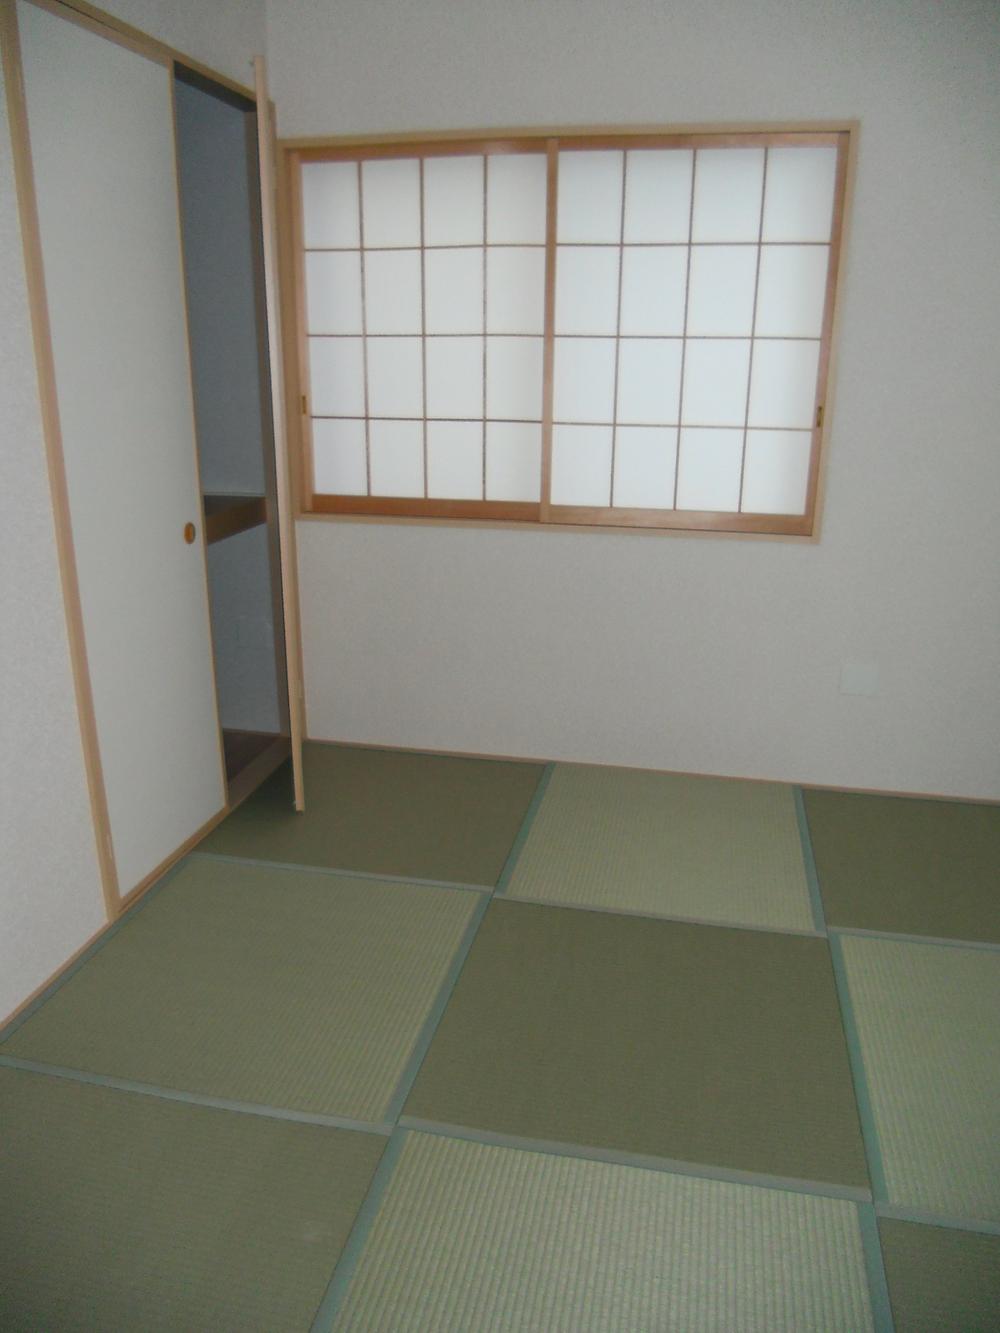 Same specifications photos (Other introspection). Japanese-style construction cases